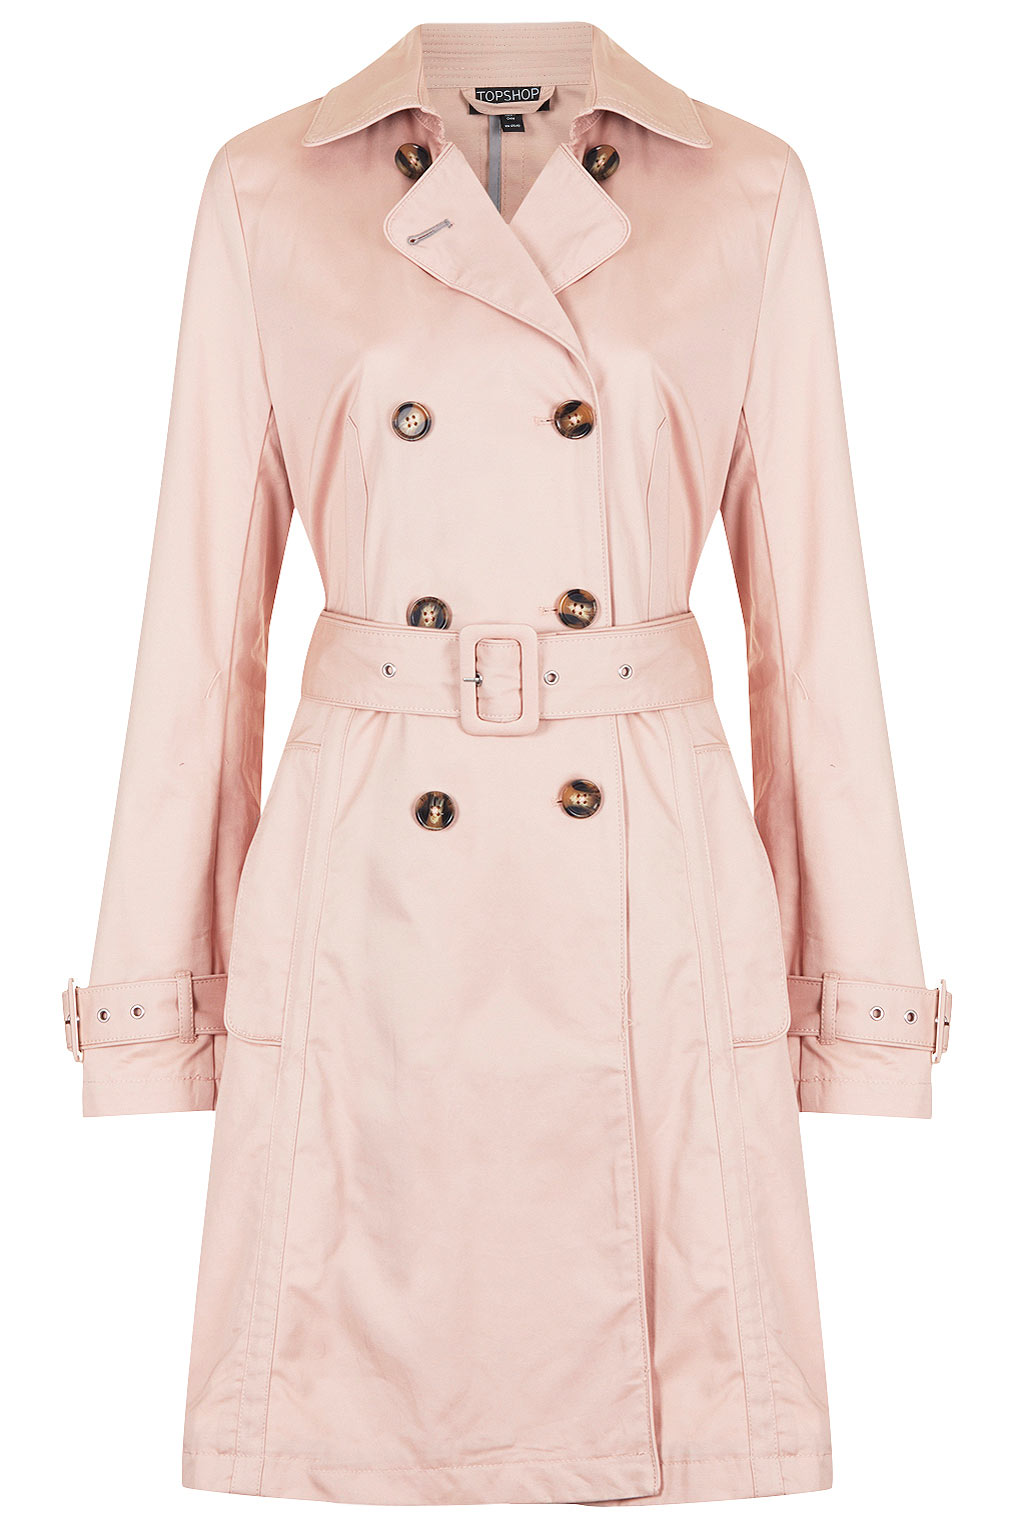 Topshop Unlined Seamed Trench Coat in Pink (pale pink) | Lyst